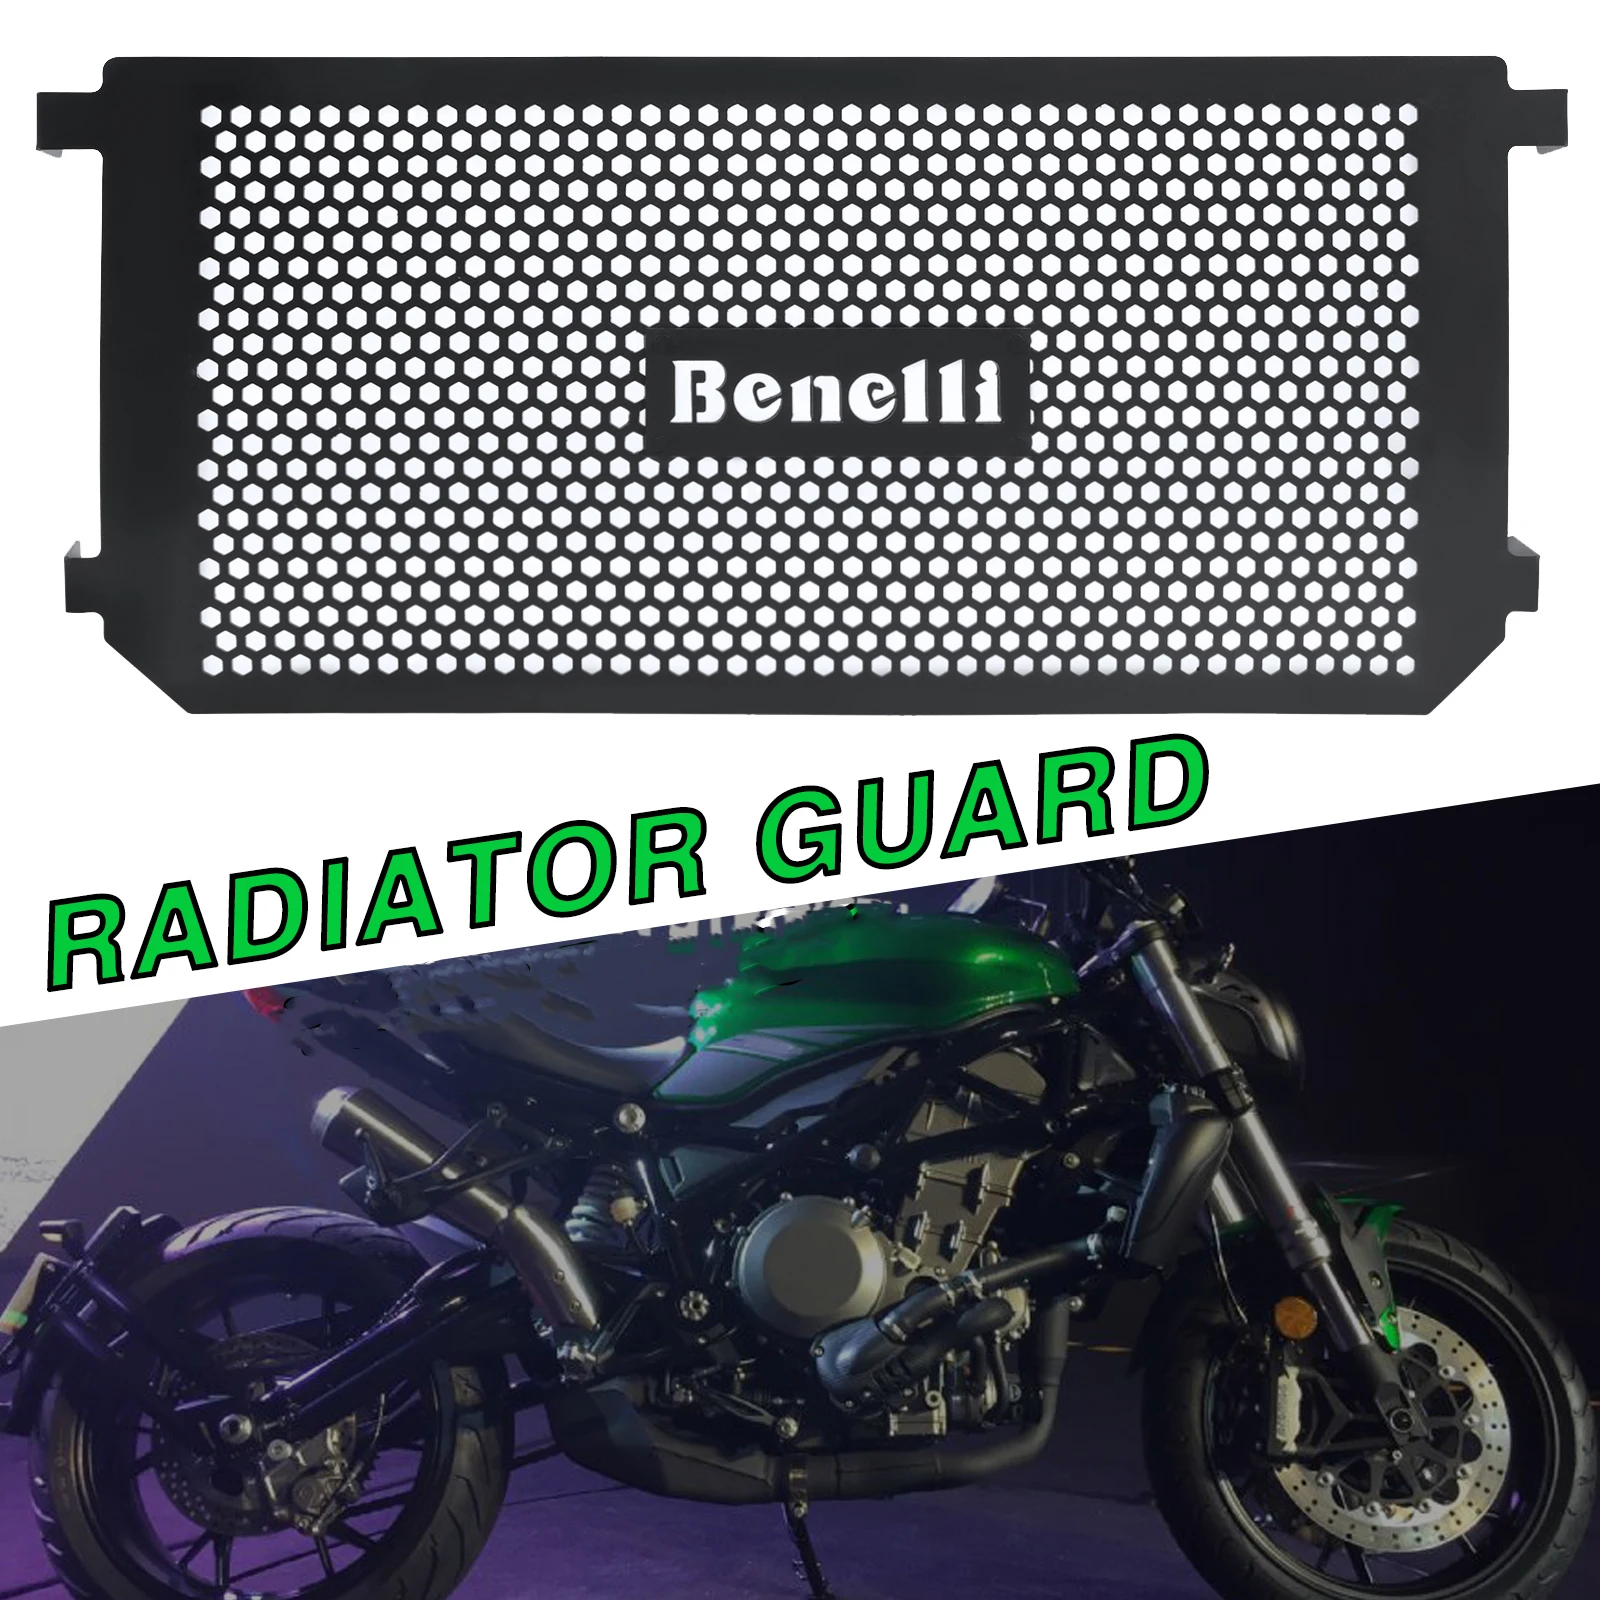 

Motorcycle Aluminum Radiator Grille Guard Protector Grill Cover Protection Accessories For Benelli 752s 752 s 2018-2021